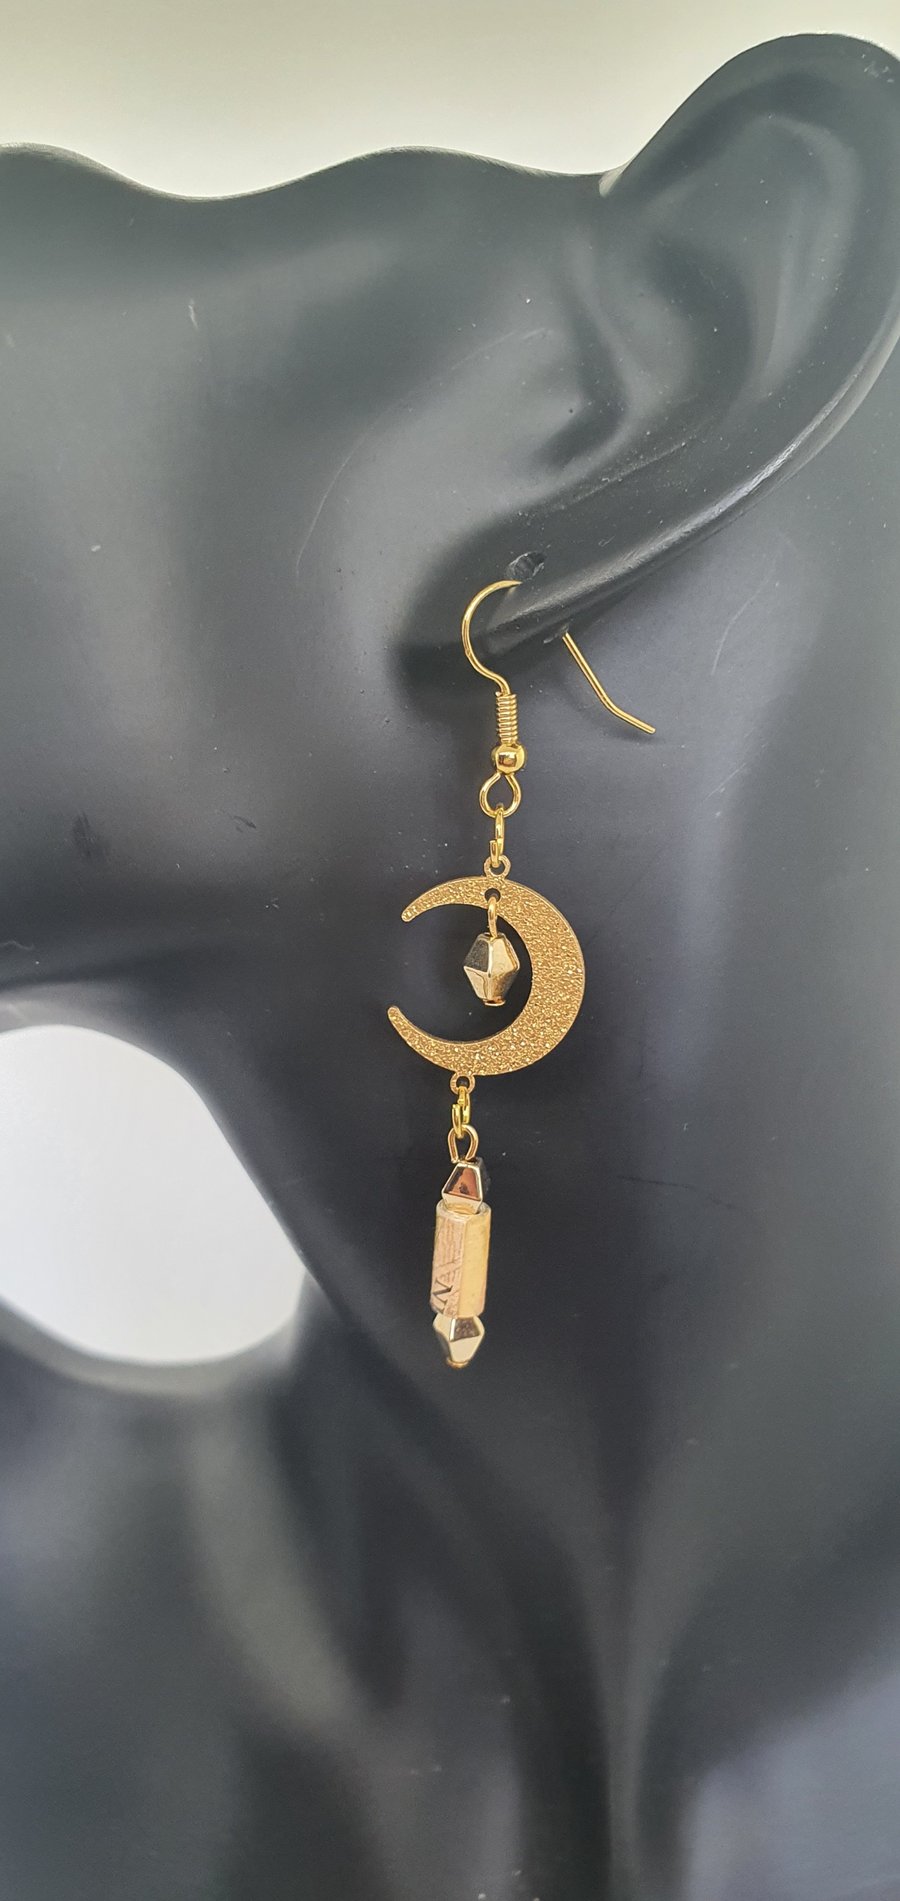 Golden crescent moon earrings with hand rolled paper beads